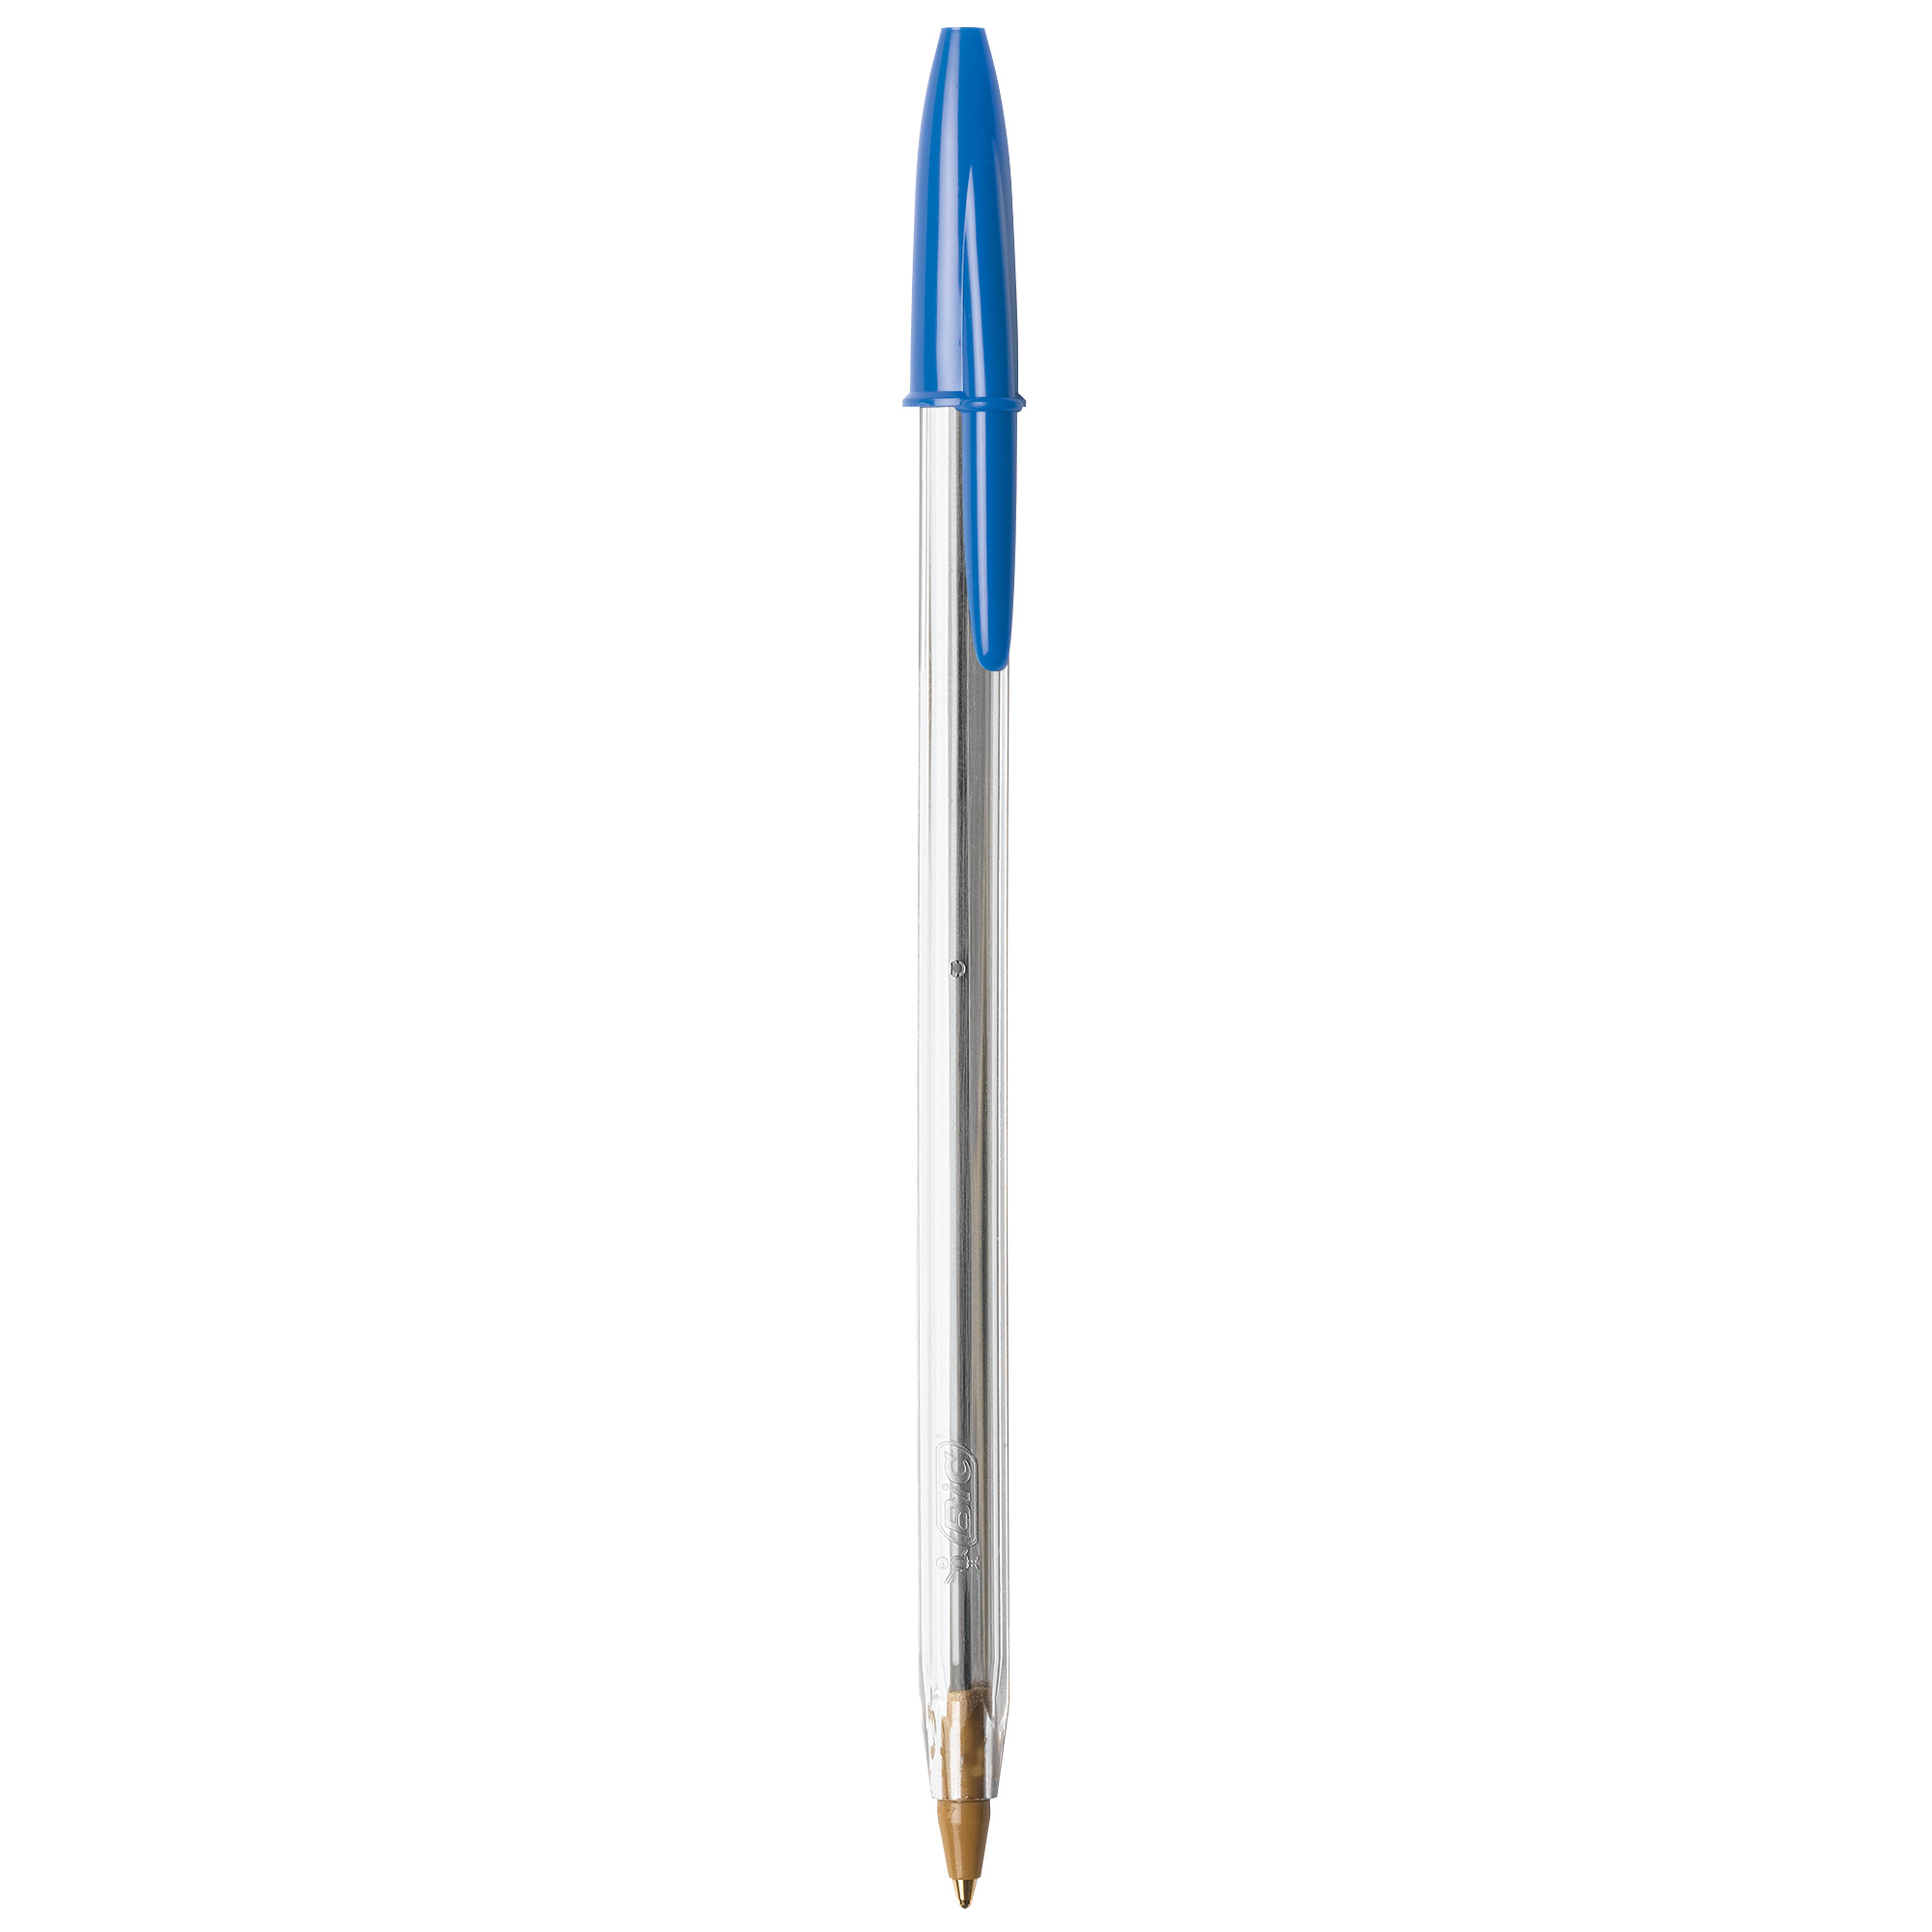 BIC Cristal Xtra Smooth Stic Ball Pens, 1.0 mm, Blue Ink, Pack of 10 - image 4 of 10